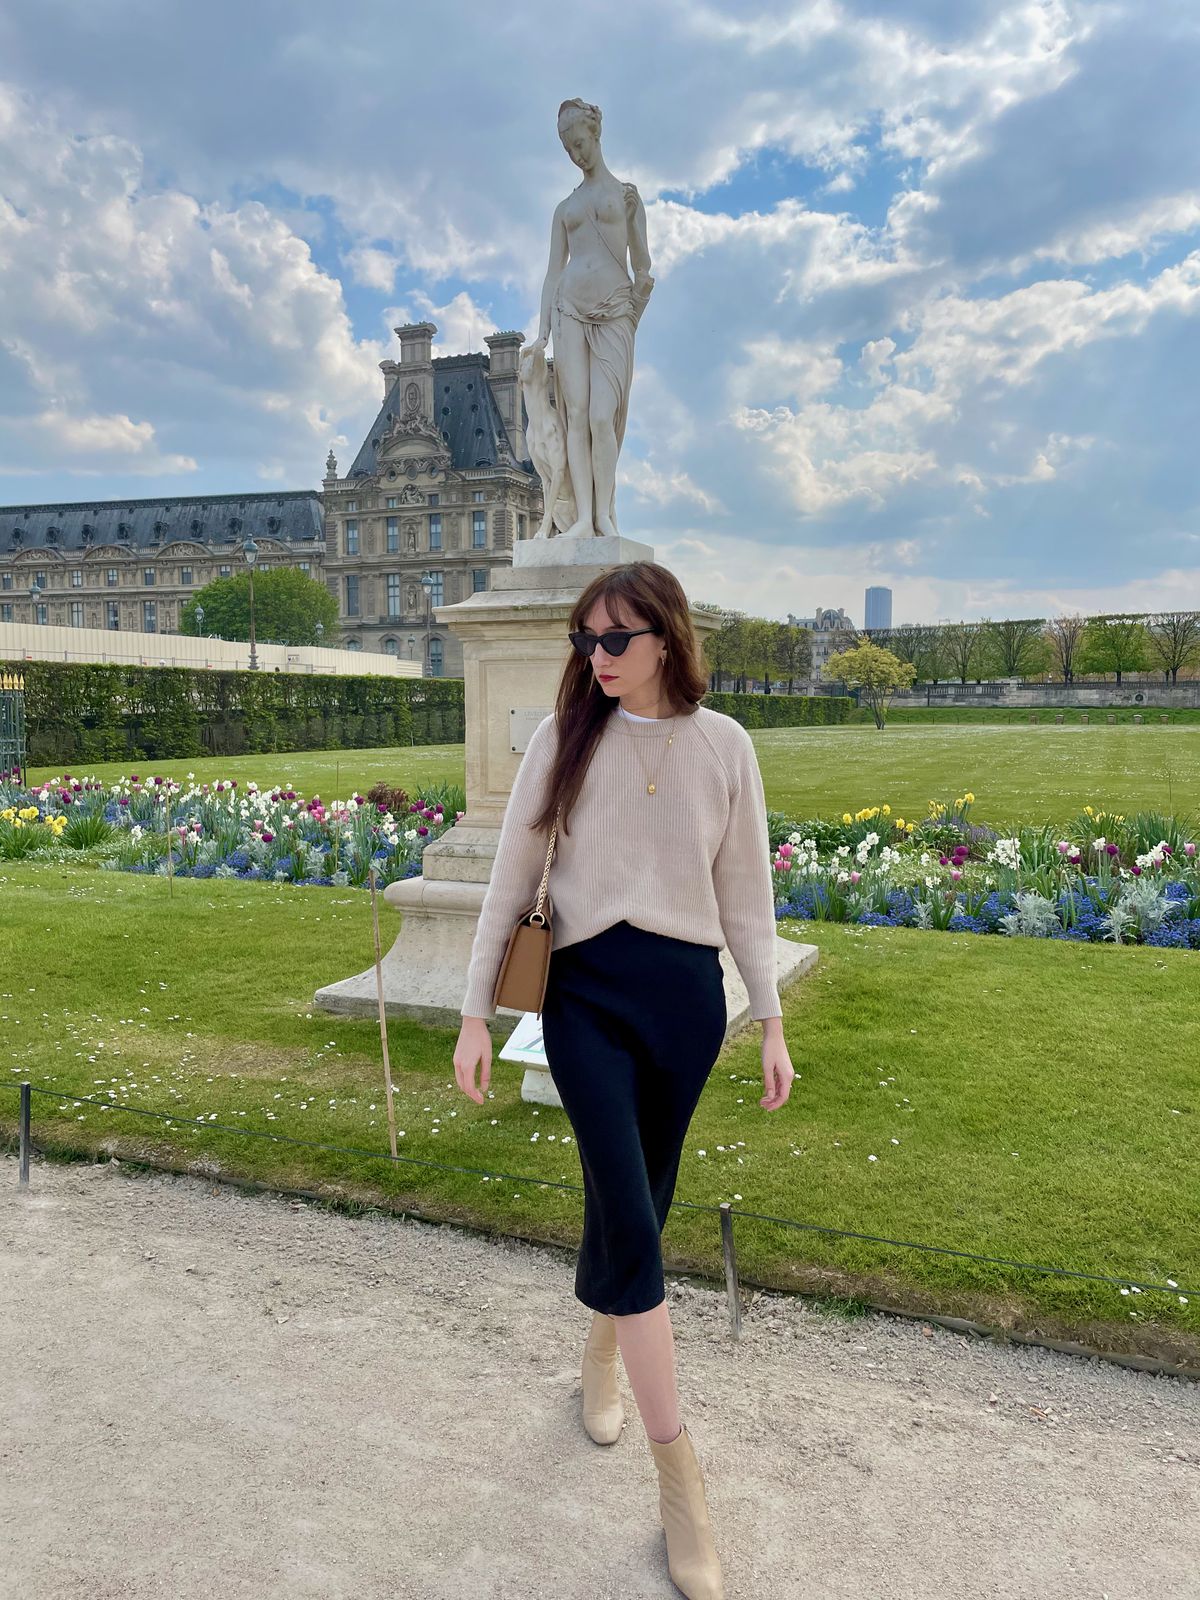 Parisian Spring Outfits - Cashmere Sweater and Black Silk Midi Skirt with Beige Leather Boots